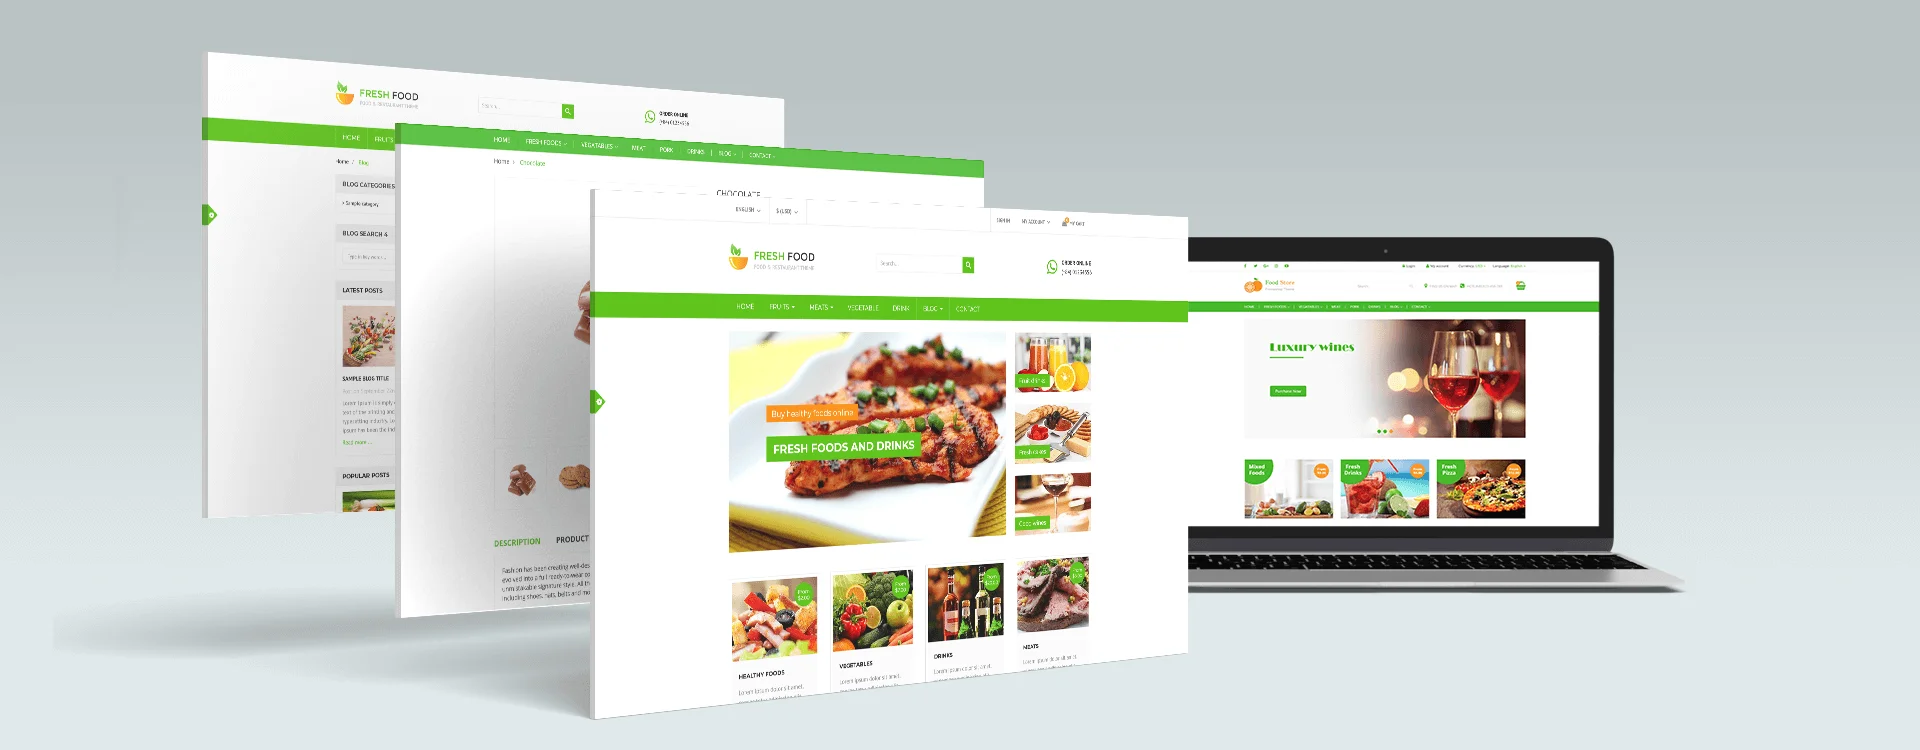 Free PrestaShop 1.7 themes for Food and Beverage business